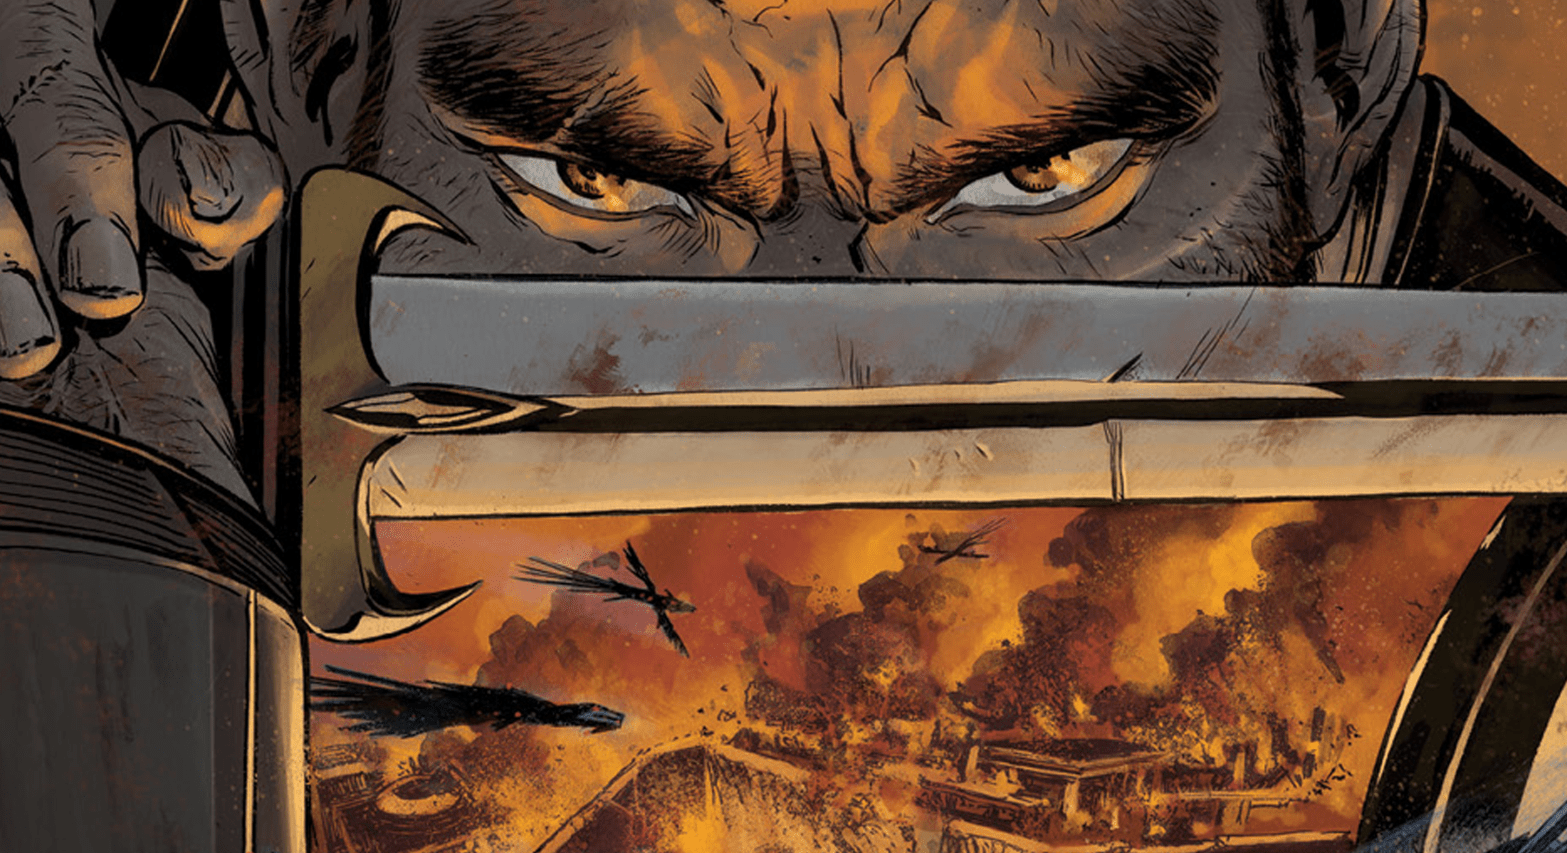 Get ready to dive into the heart of one of Dune's deadliest warriors. (Image: Max Fiumara/Boom Studios)